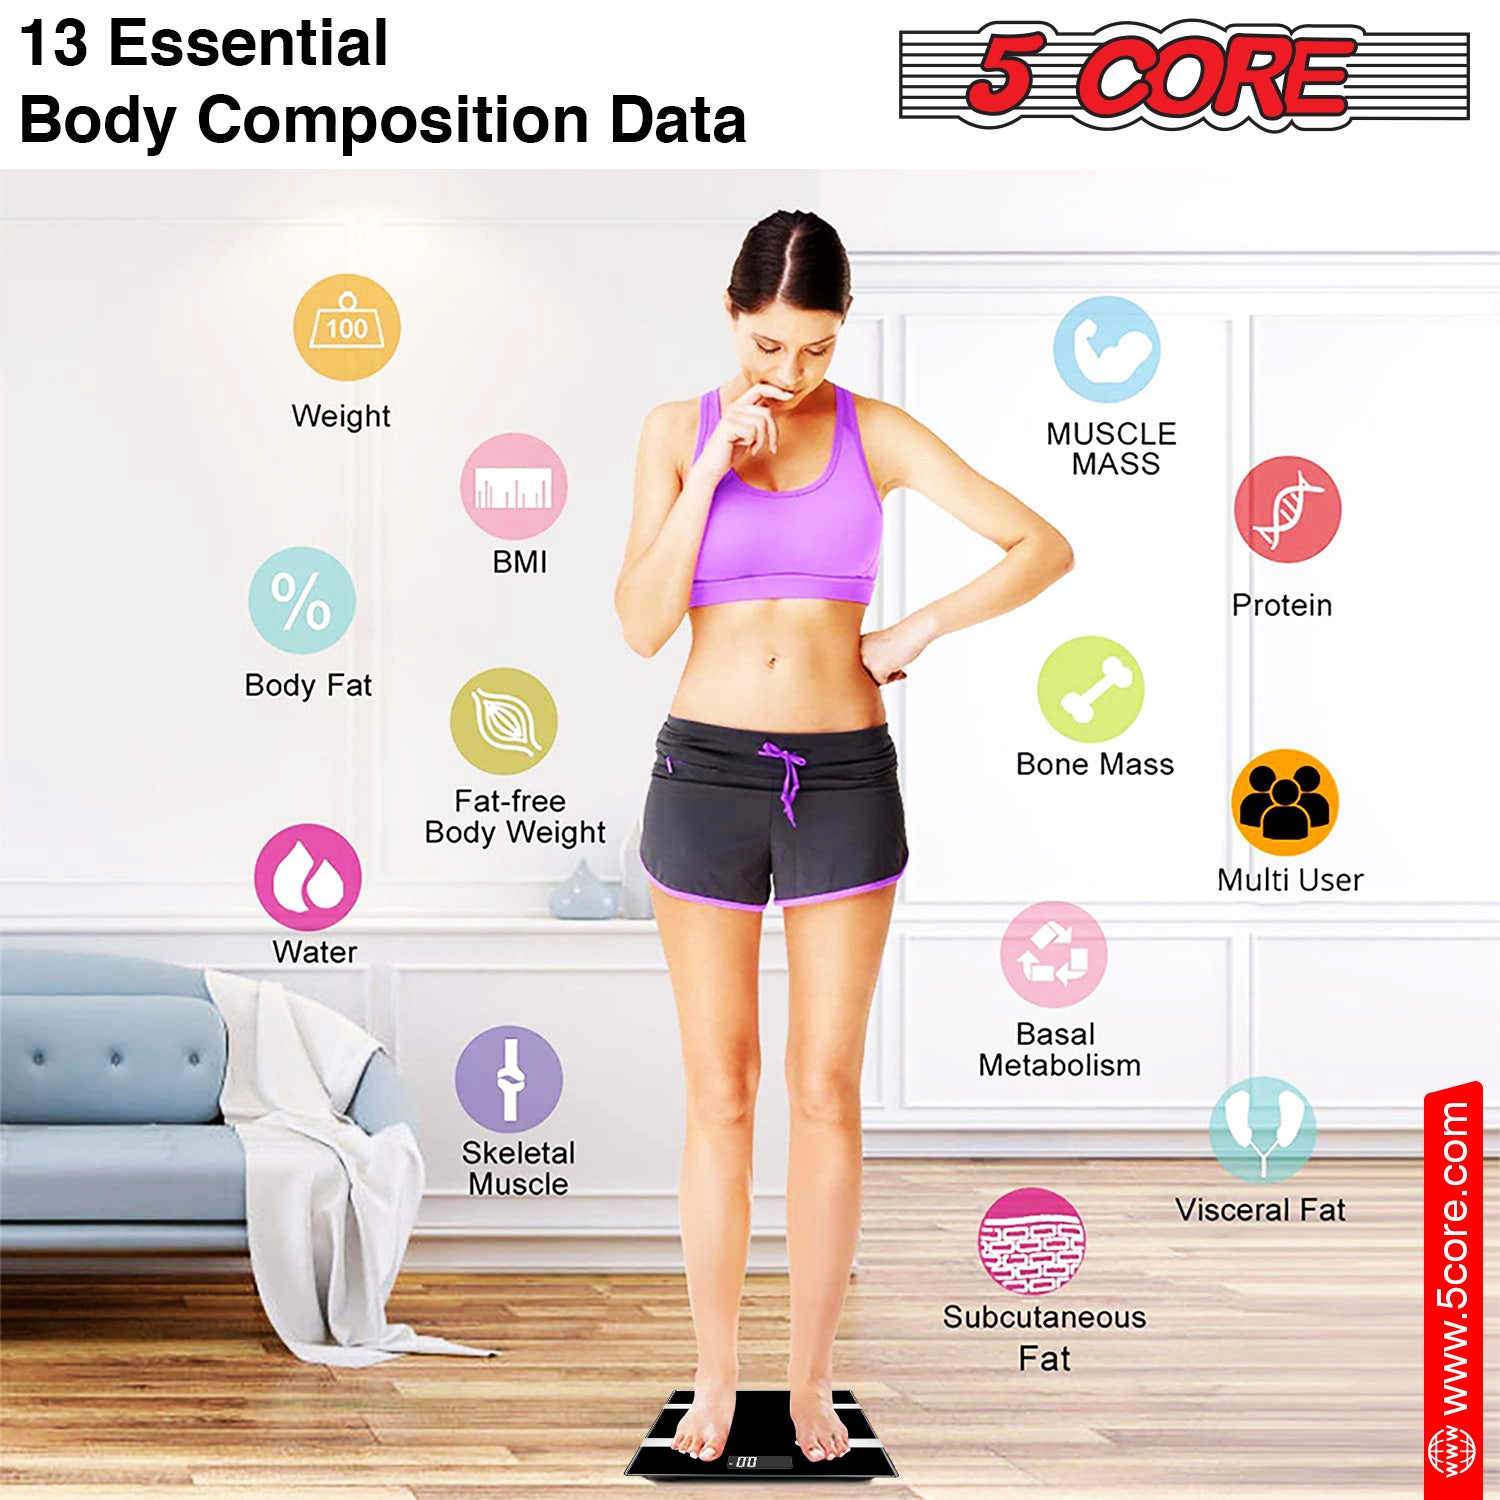 5 Core Weight Smart Scale for Body Weight Digital Bathroom Scale BMI Weighing Bluetooth Body Fat Monitor Health Analyzer Sync with App -BBS HL B BLK